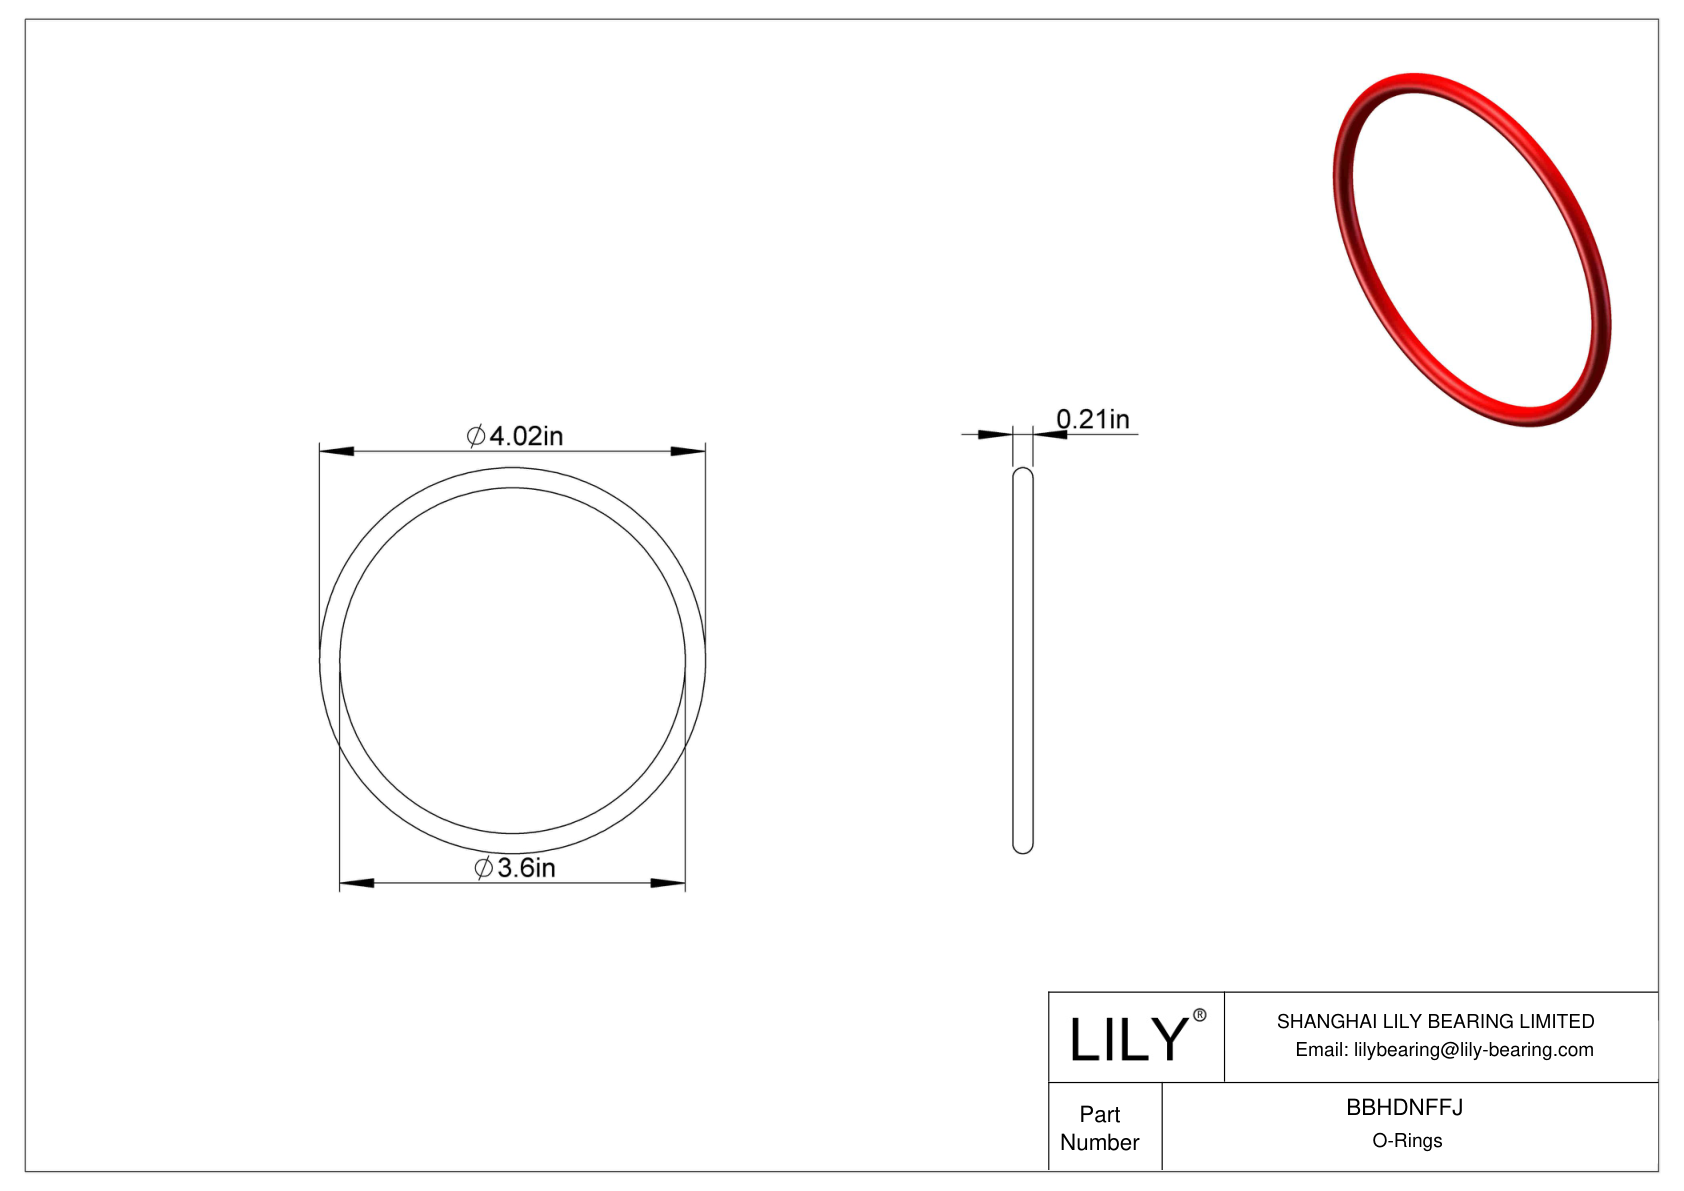 BBHDNFFJ High Temperature O-Rings Round cad drawing